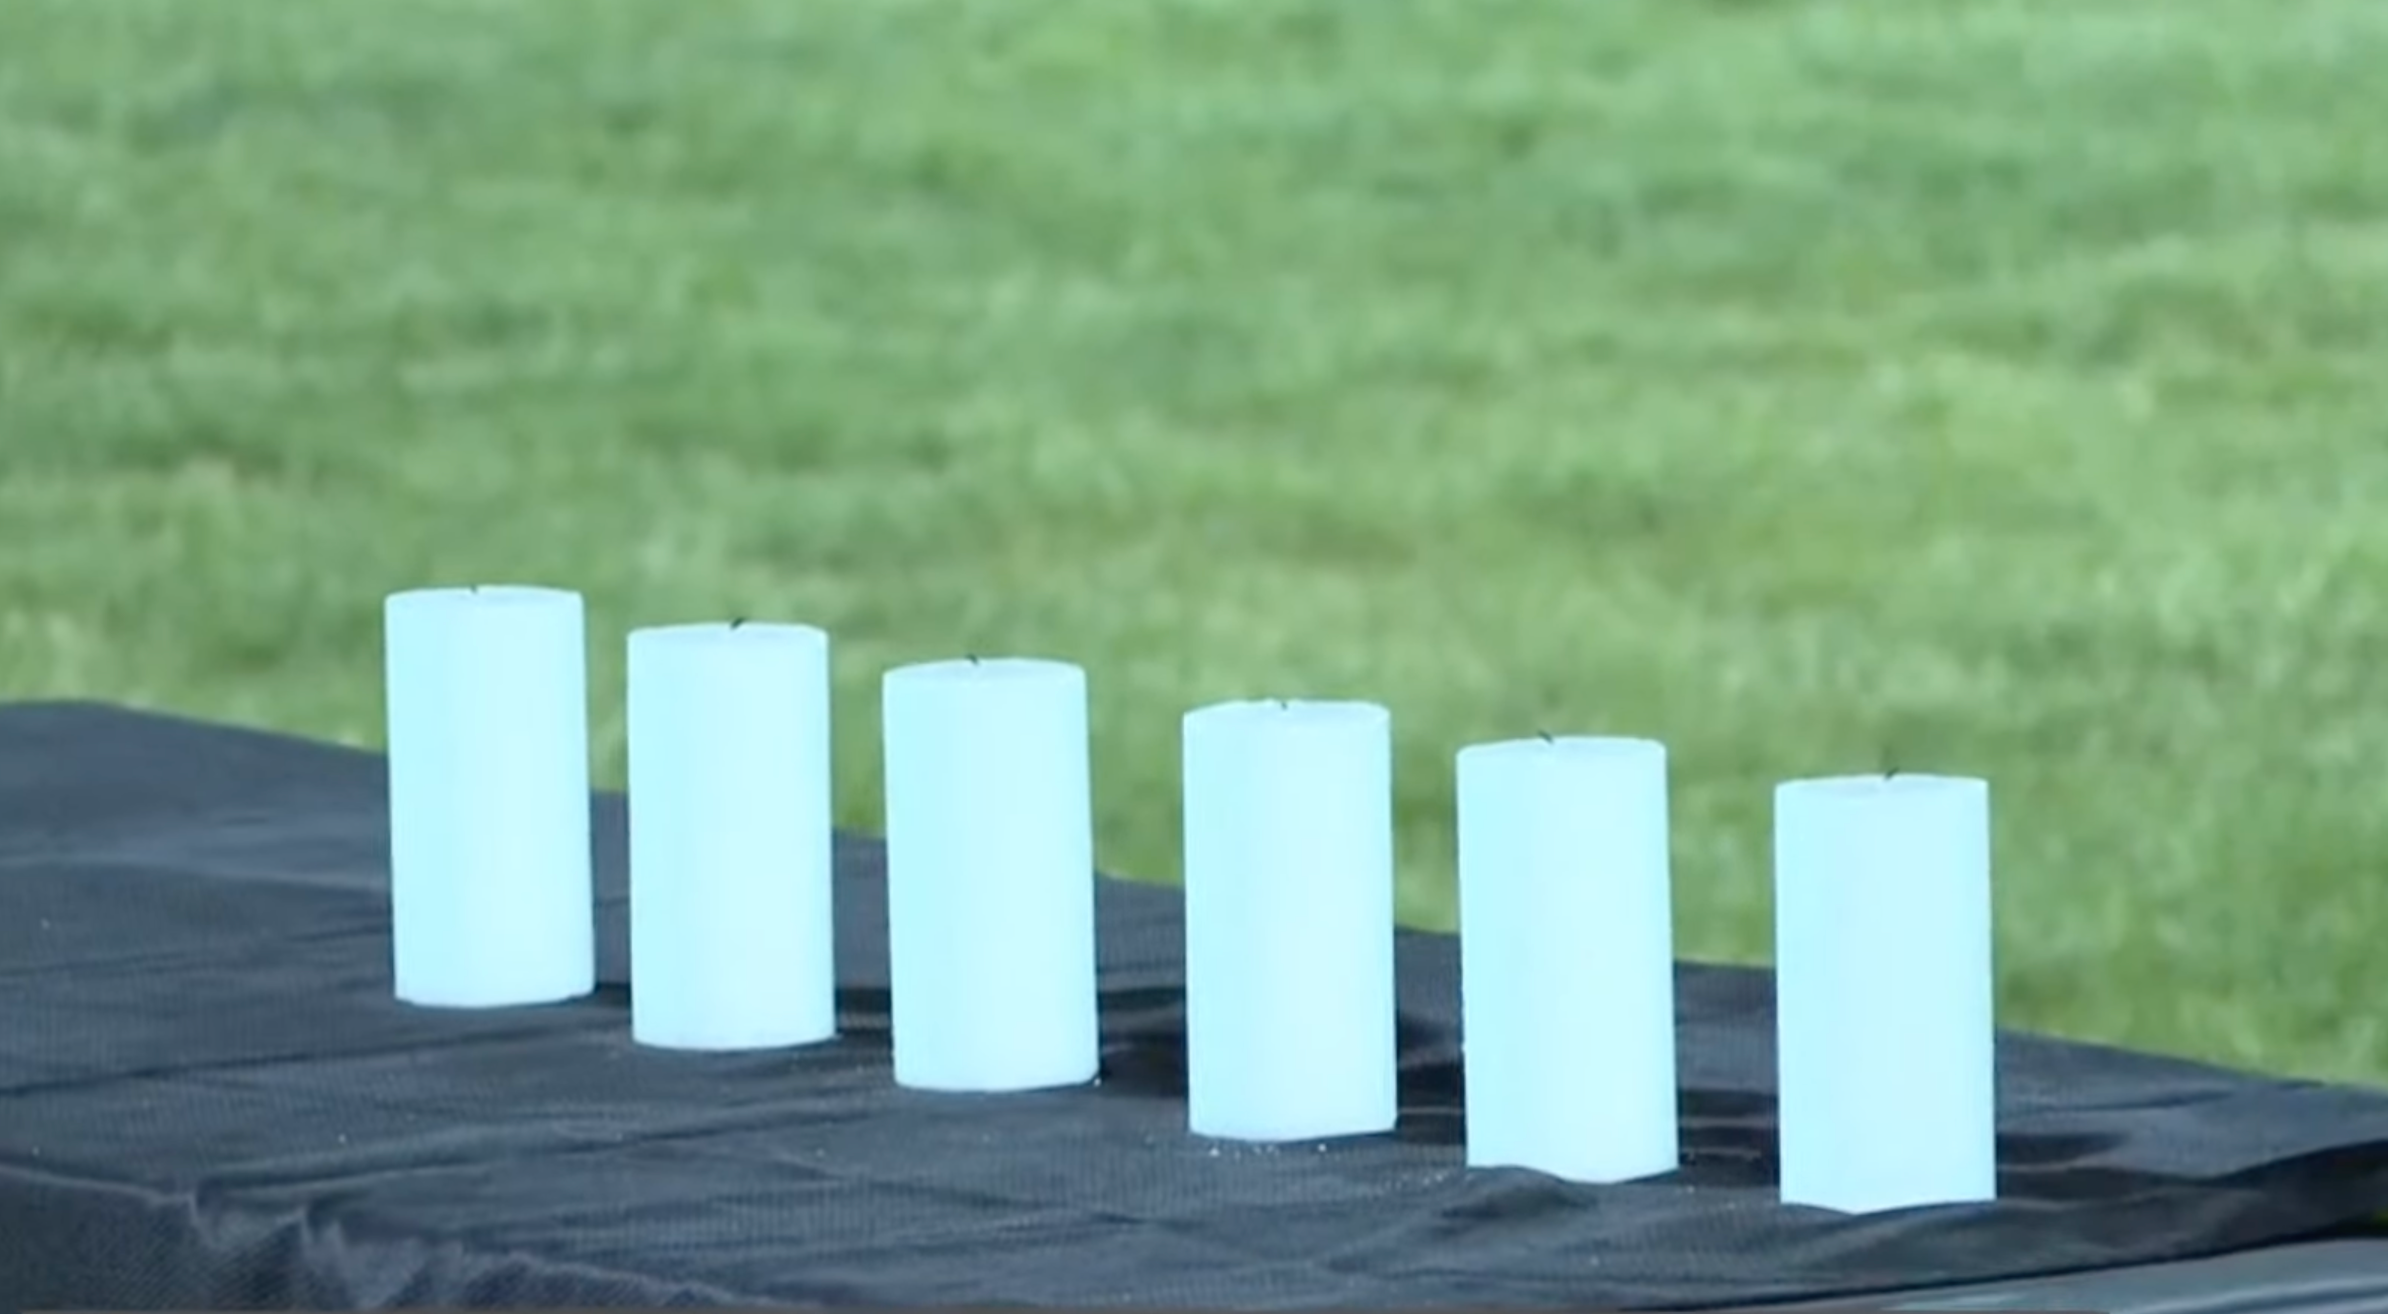 Six candles were lit at the vigil, one for each victim